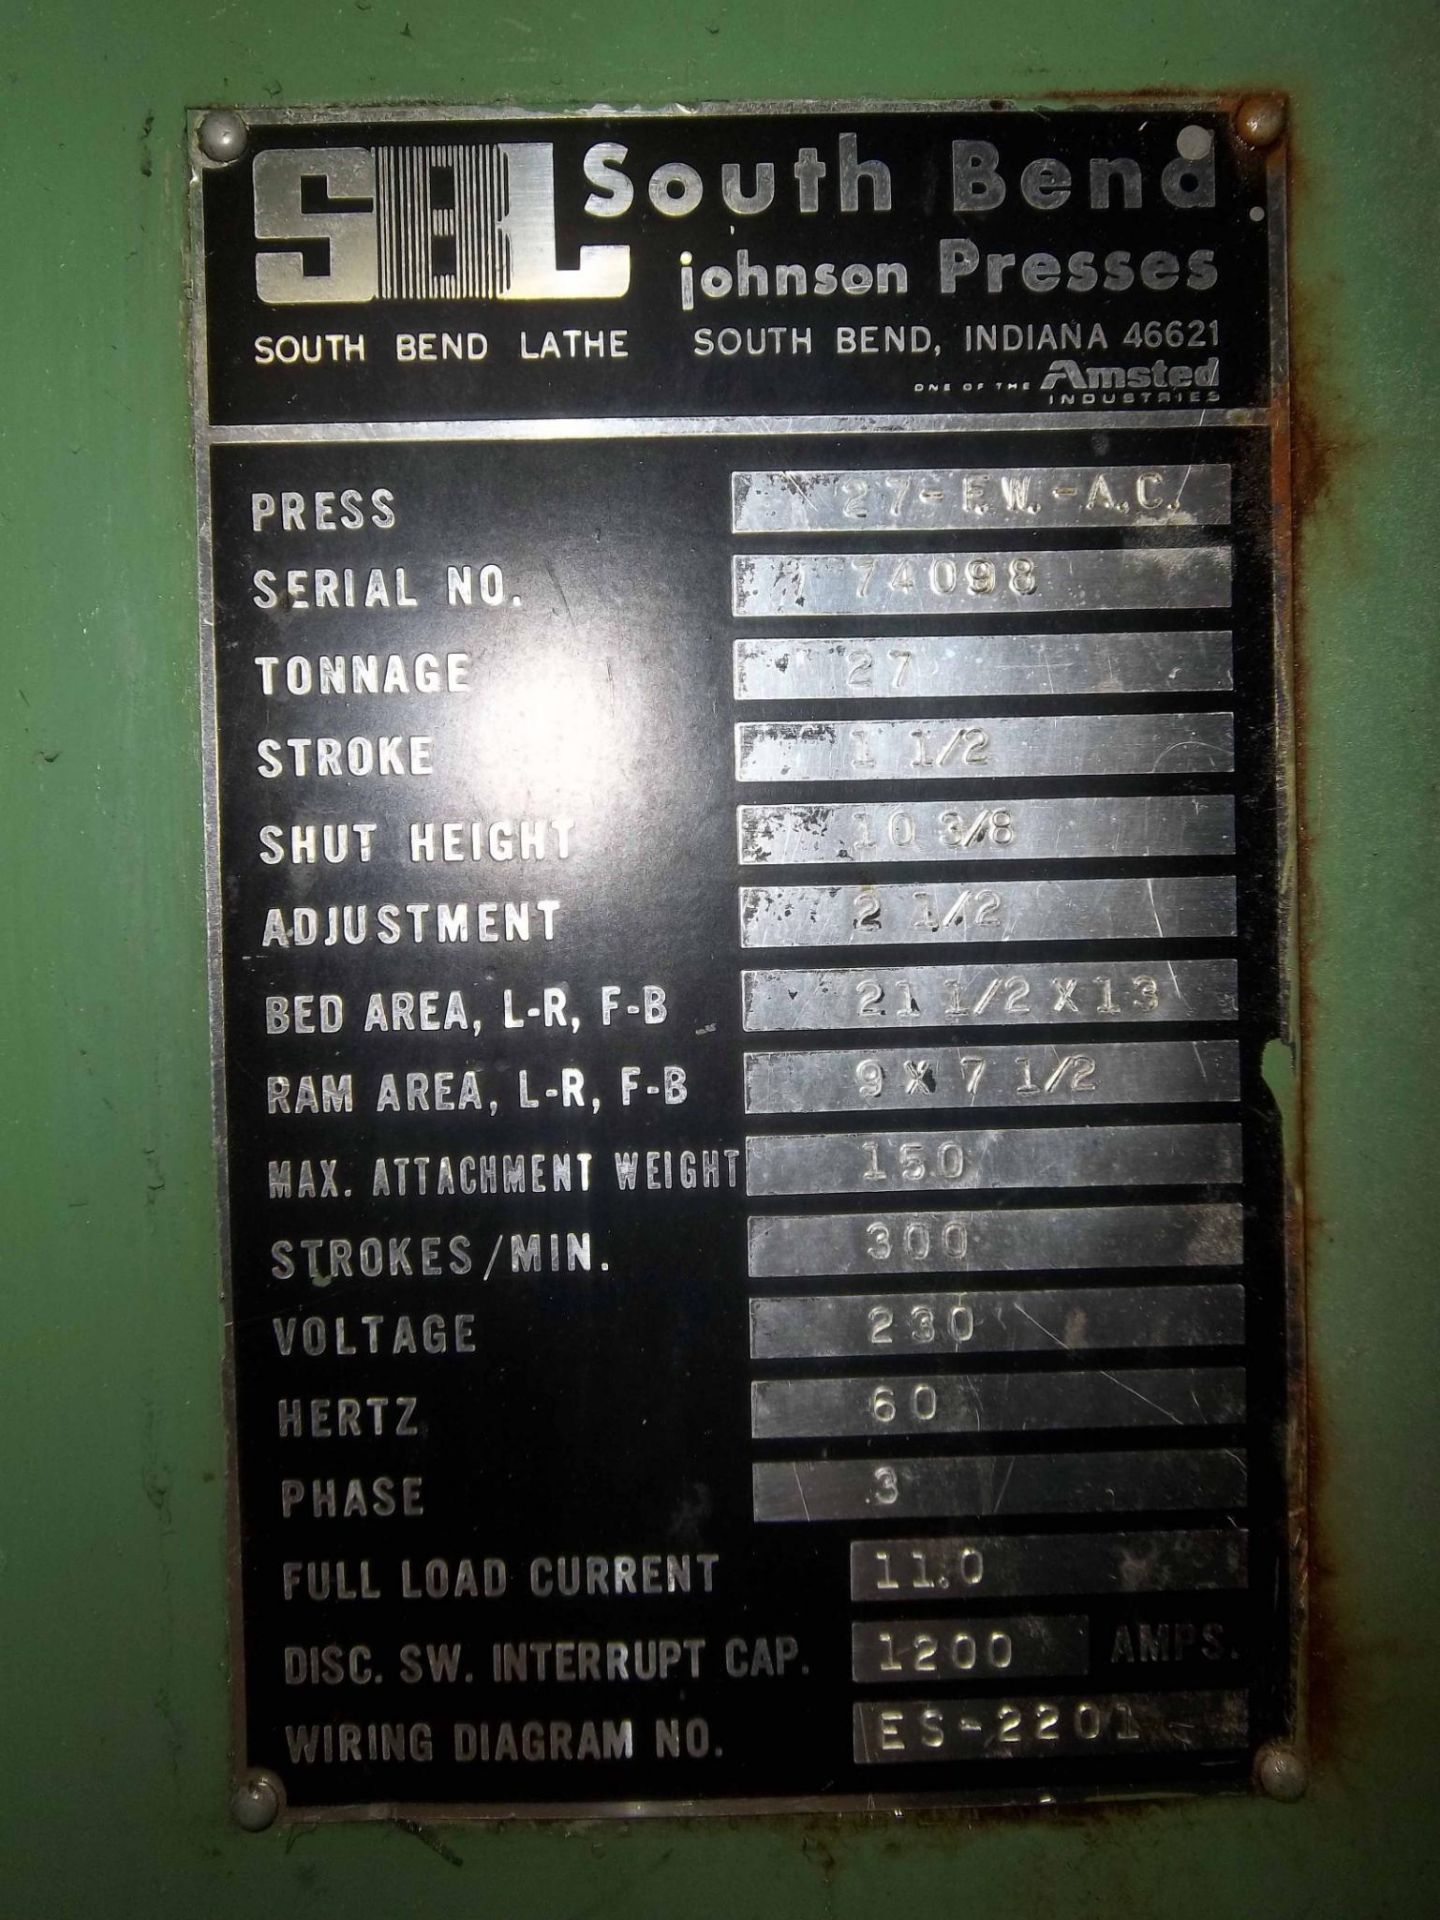 OBI PRESS, SOUTH BEND JOHNSON 27 T. CAP. MDL. 27-EW-A.C., 230 v., 3-phase, motor can swap to 460 v., - Image 10 of 10